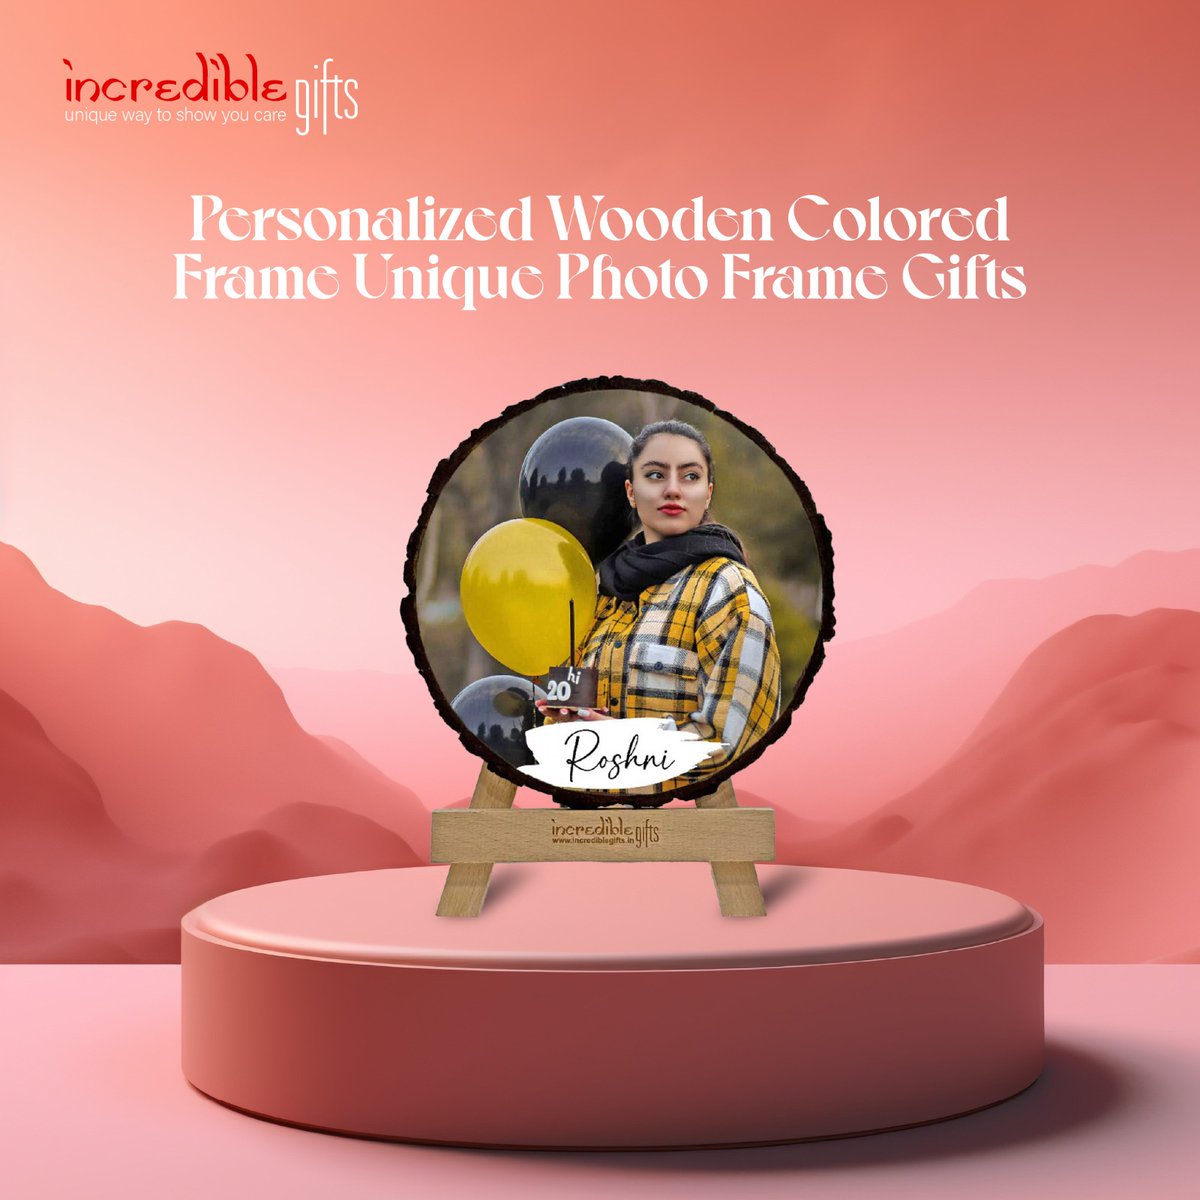 Cherish your memories in style with our Personalized Wooden Colored Frame – the perfect gift for capturing your special moments. Each frame is meticulously crafted with care, offering a unique touch to your treasured photos. Available in a size of 7.5 inches.
#incrediblegifts